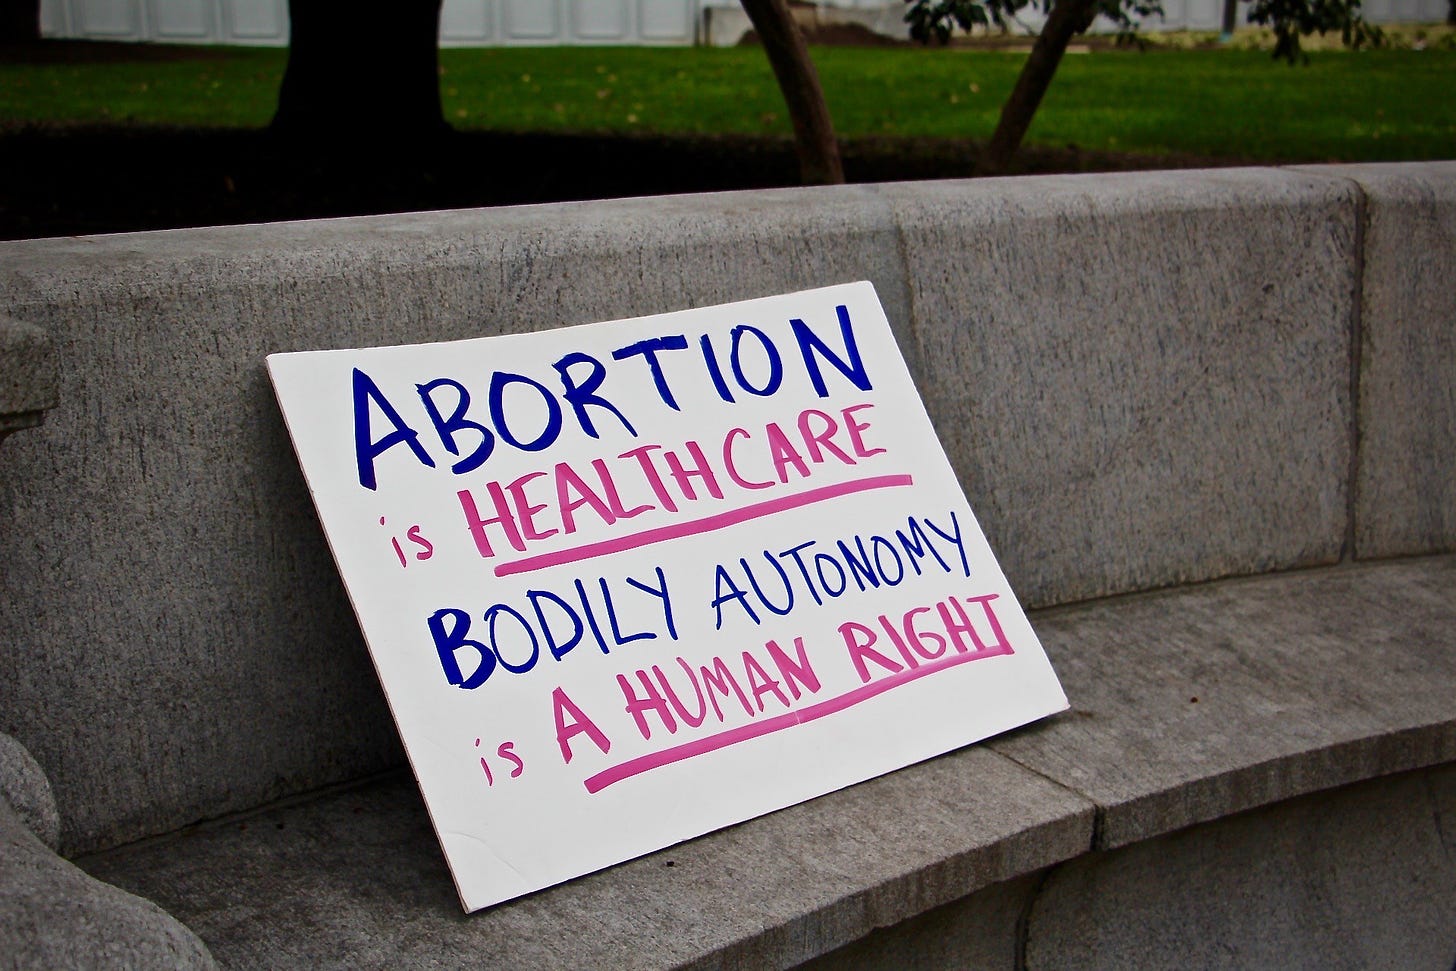 Pro-choice sign sitting on a bench outside the U.S. Supreme Court reading "abortion is healthcare bodily autonomy is a human right"